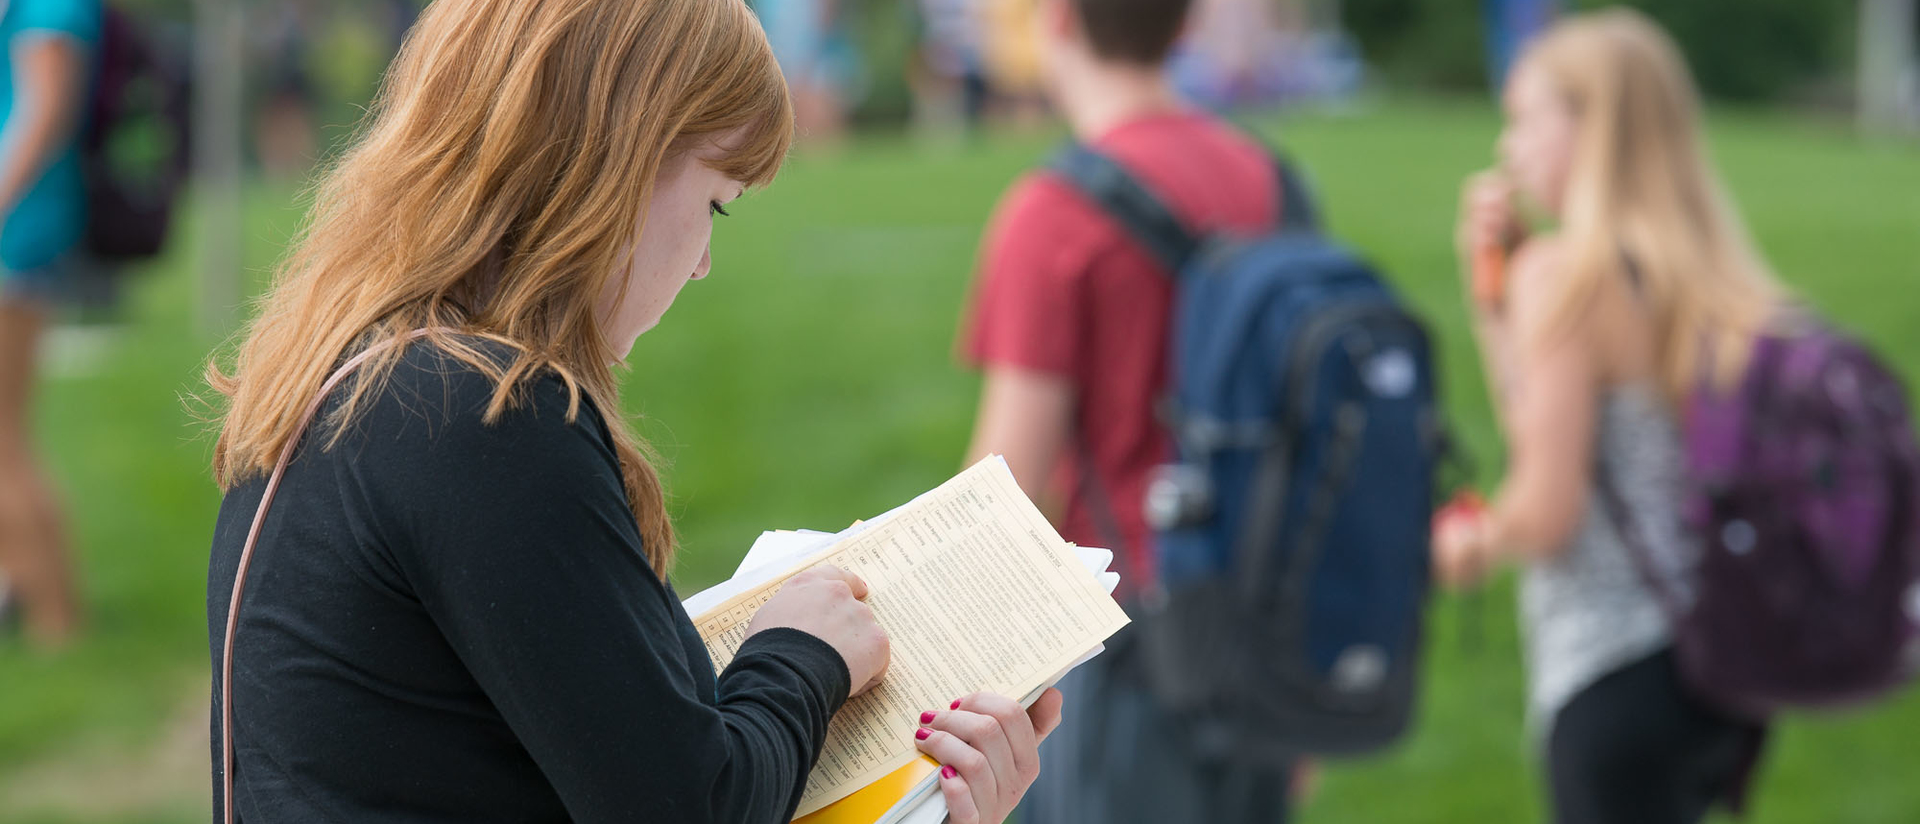 Student walking and reading papers